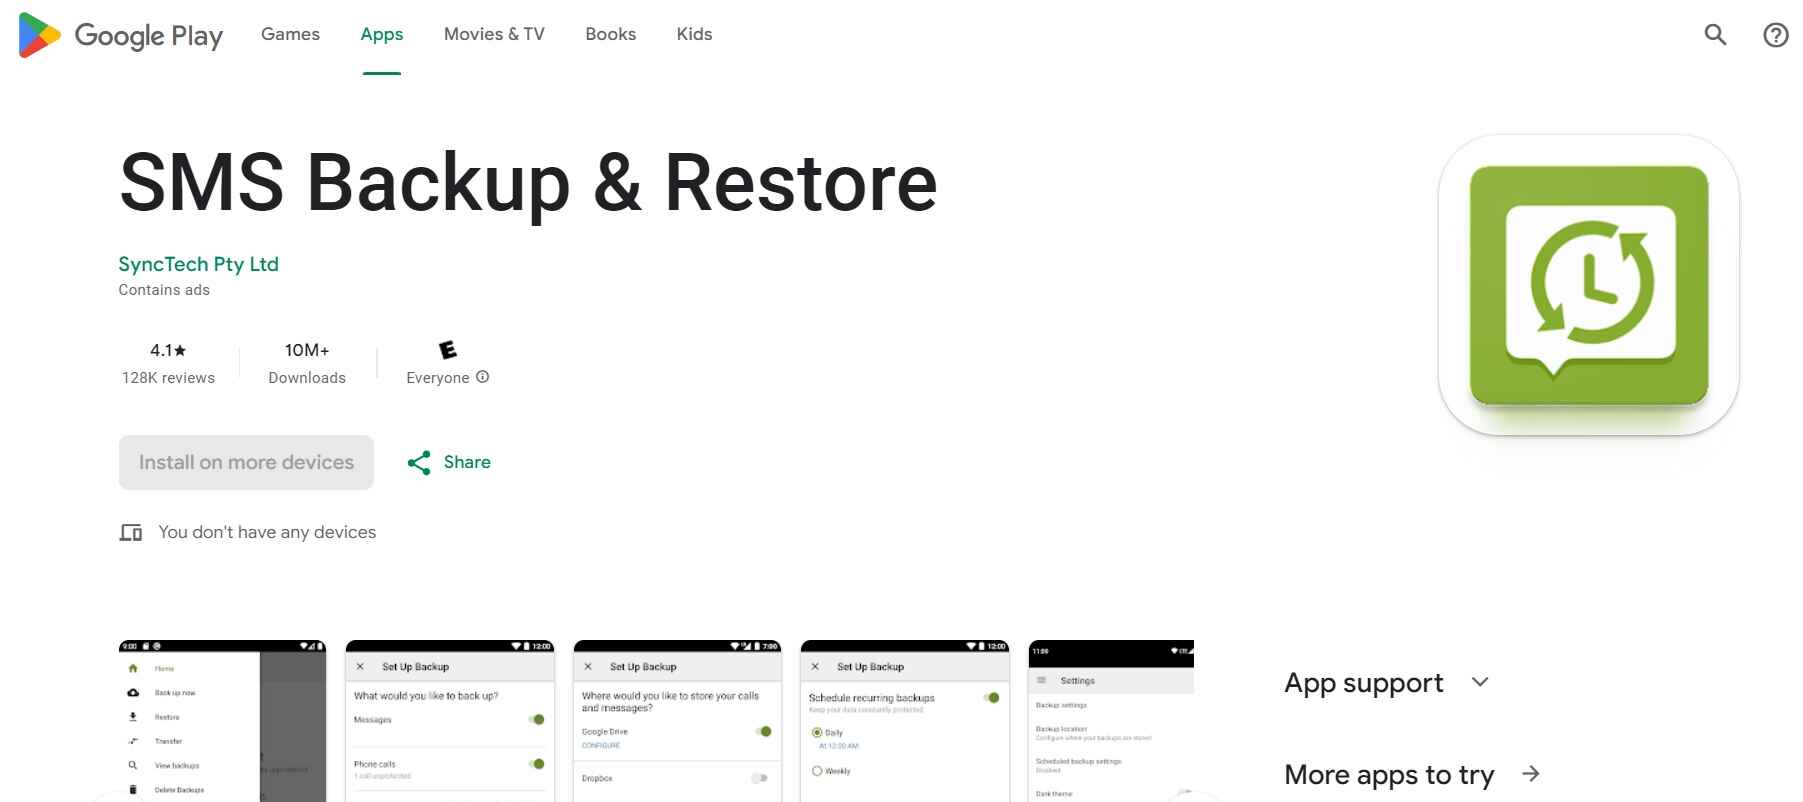 SMS Backup & Restore - Play Store